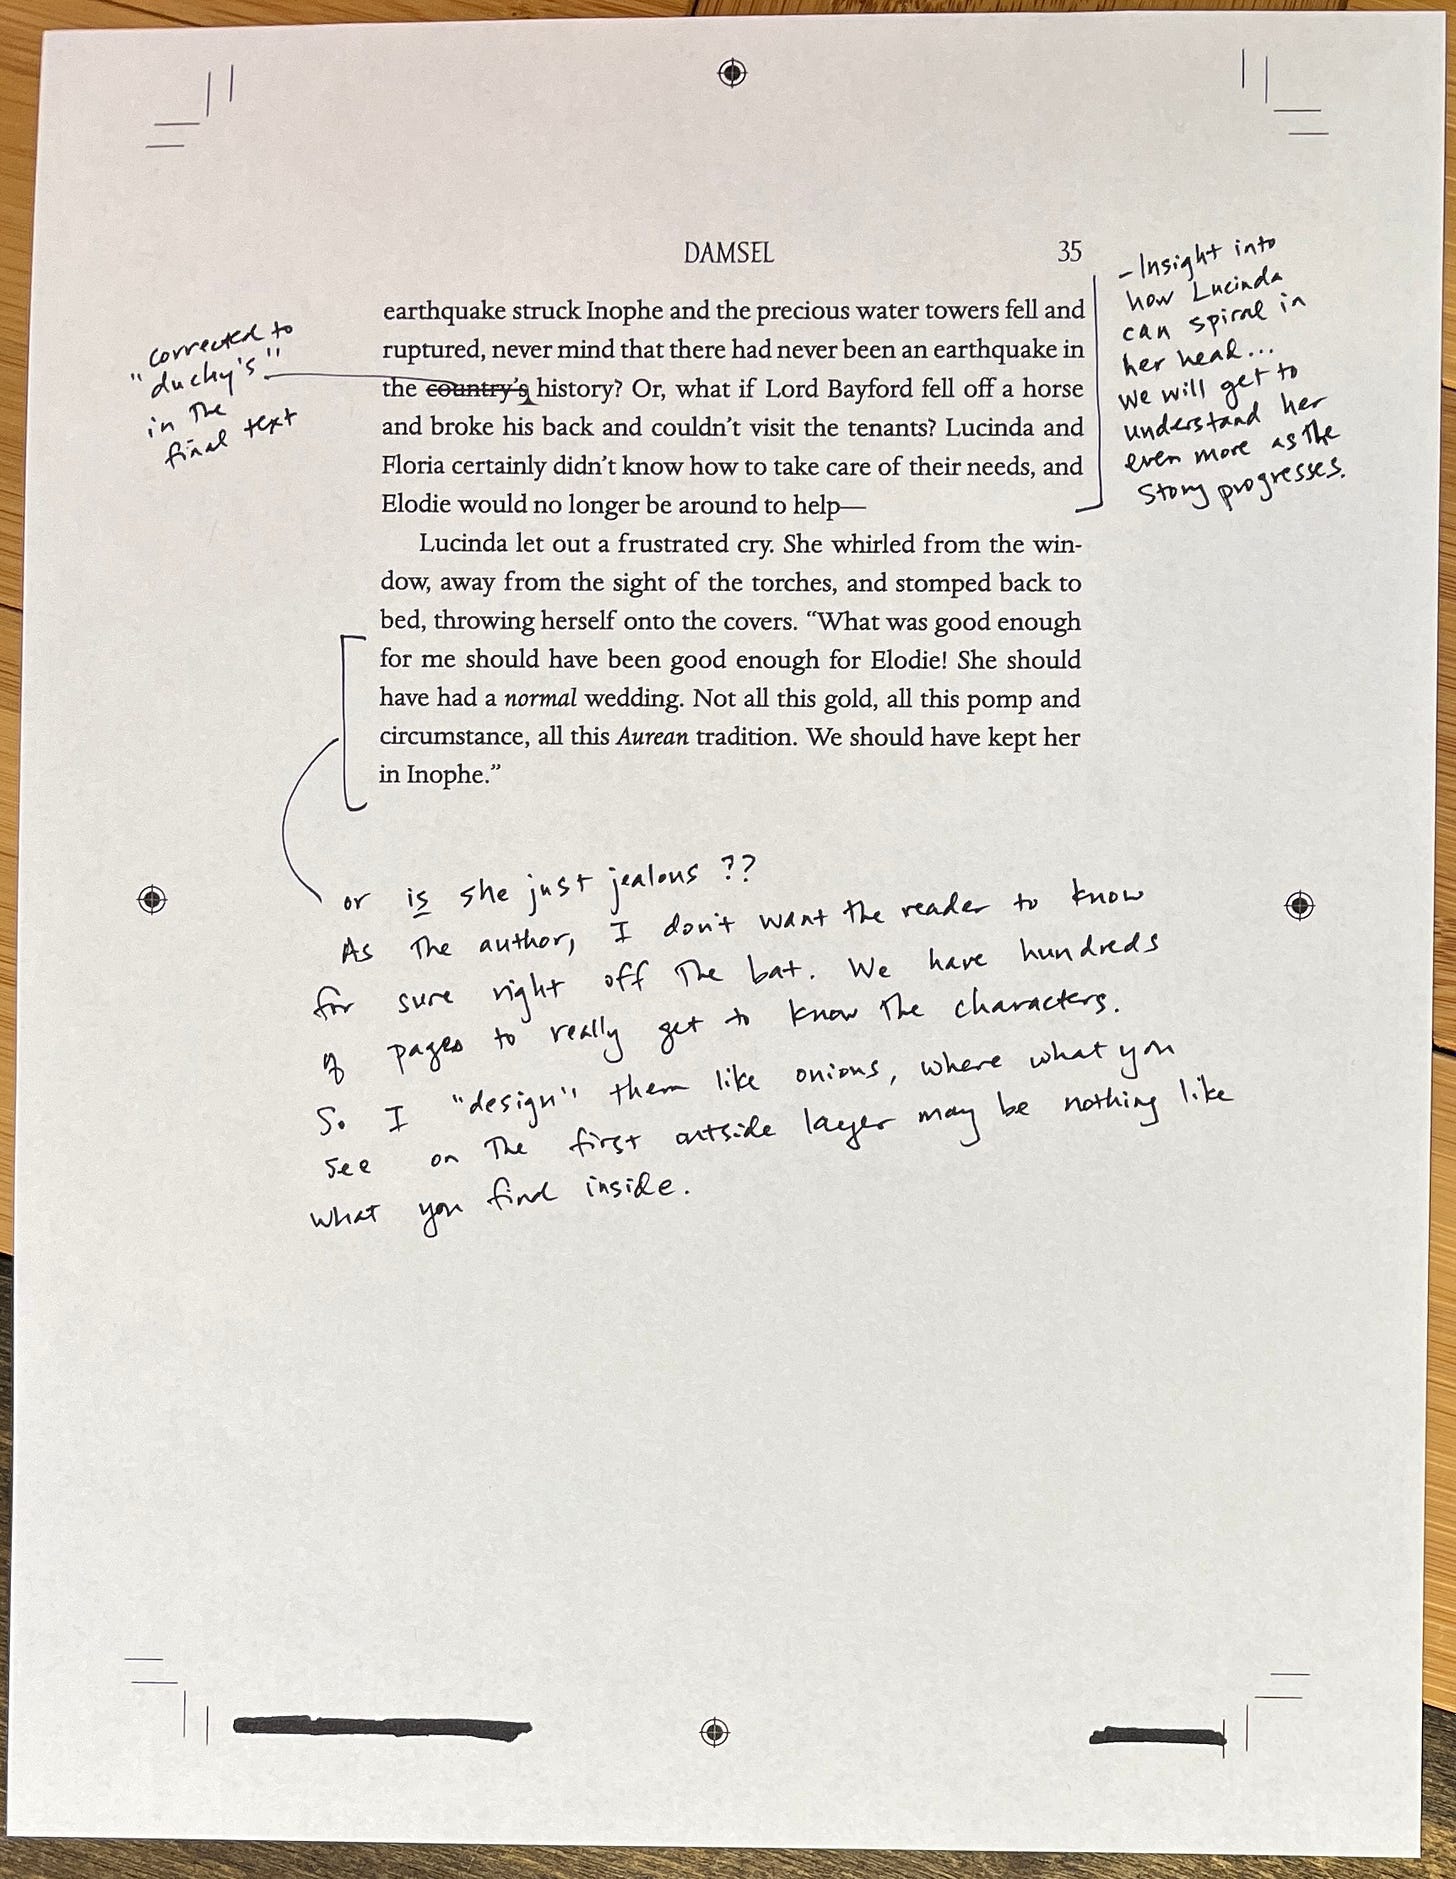 Second annotated page from DAMSEL with notes from the author.